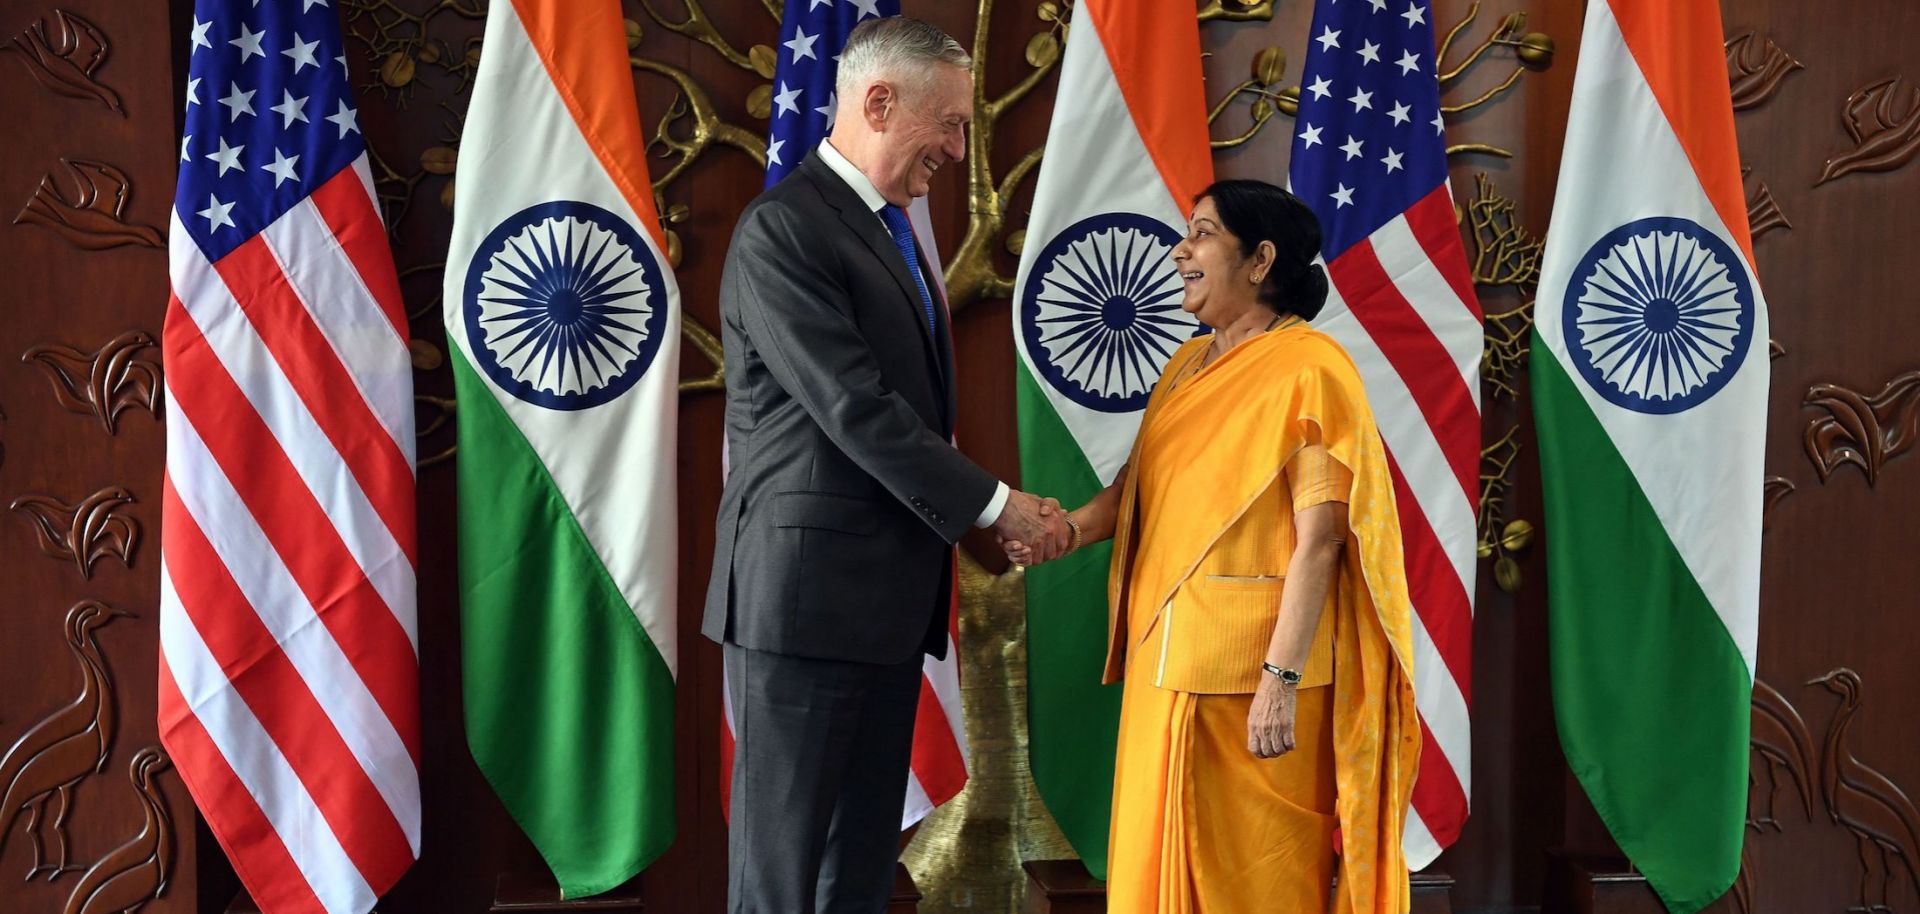 U.S. Secretary of Defense Jim Mattis, left, shakes hands with Indian Foreign Minister Sushma Swaraj before the 2+2 meeting in New Delhi on Sept. 6.